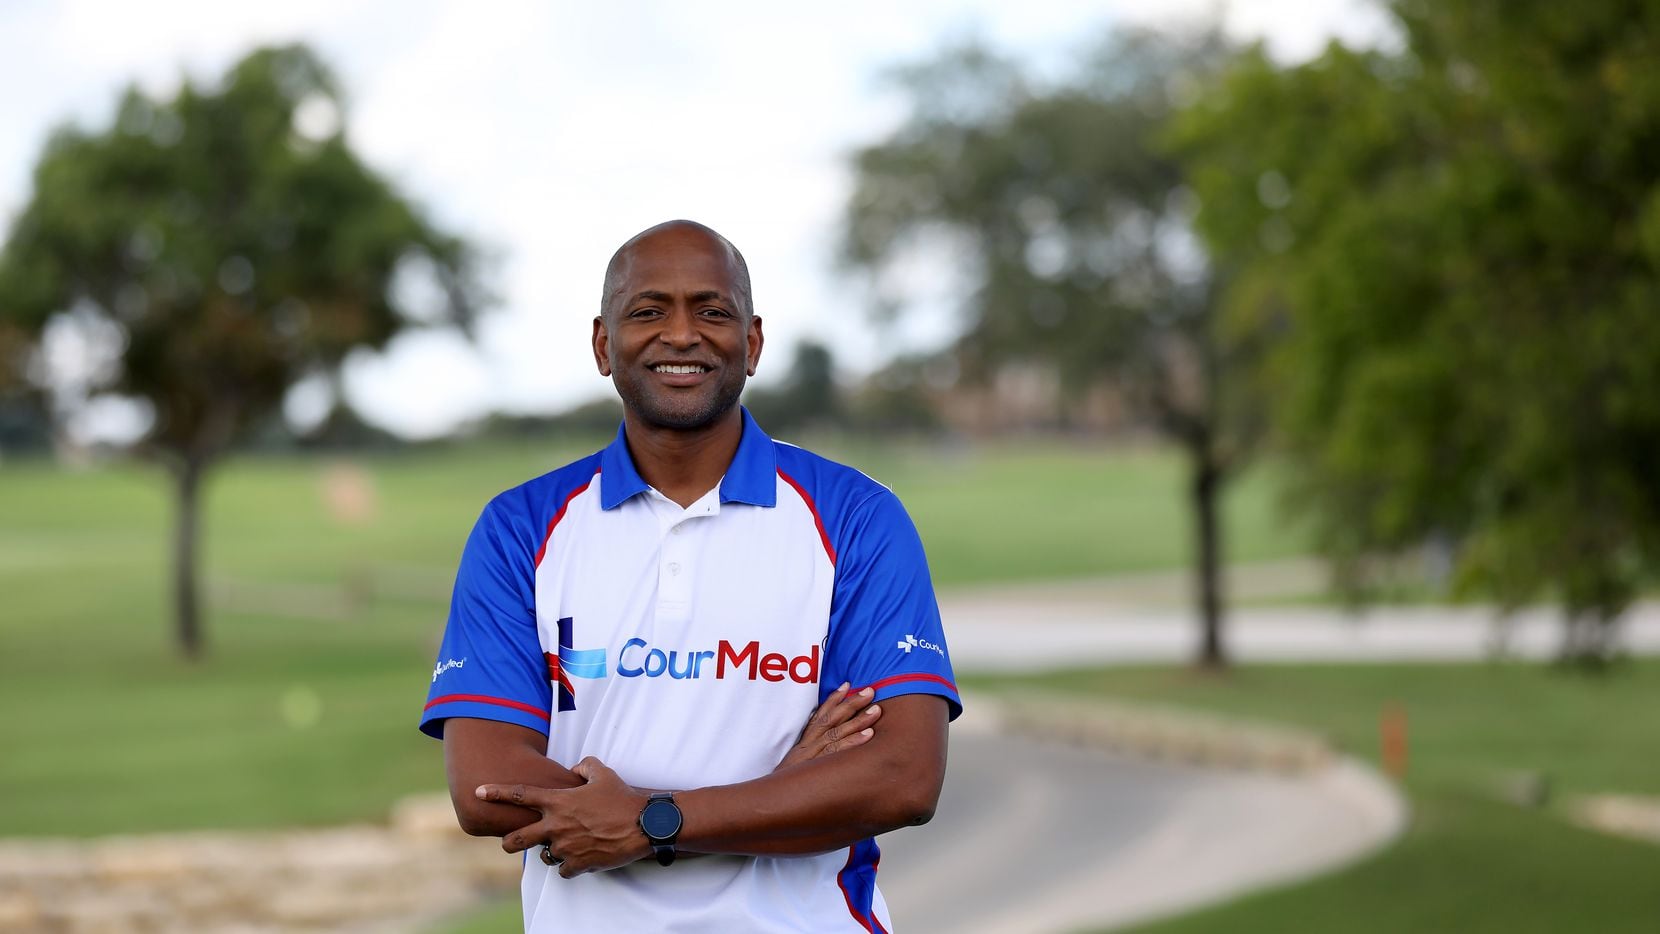 Derrick Miles is the founder and CEO of CourMed, a concierge delivery service that delivers pharmaceuticals, vitamins, CBD oil, IV vitamin therapy, COVID-19 vaccines, monoclonal antibody treatments and other health care products to customers' homes using crowdsourced drivers.